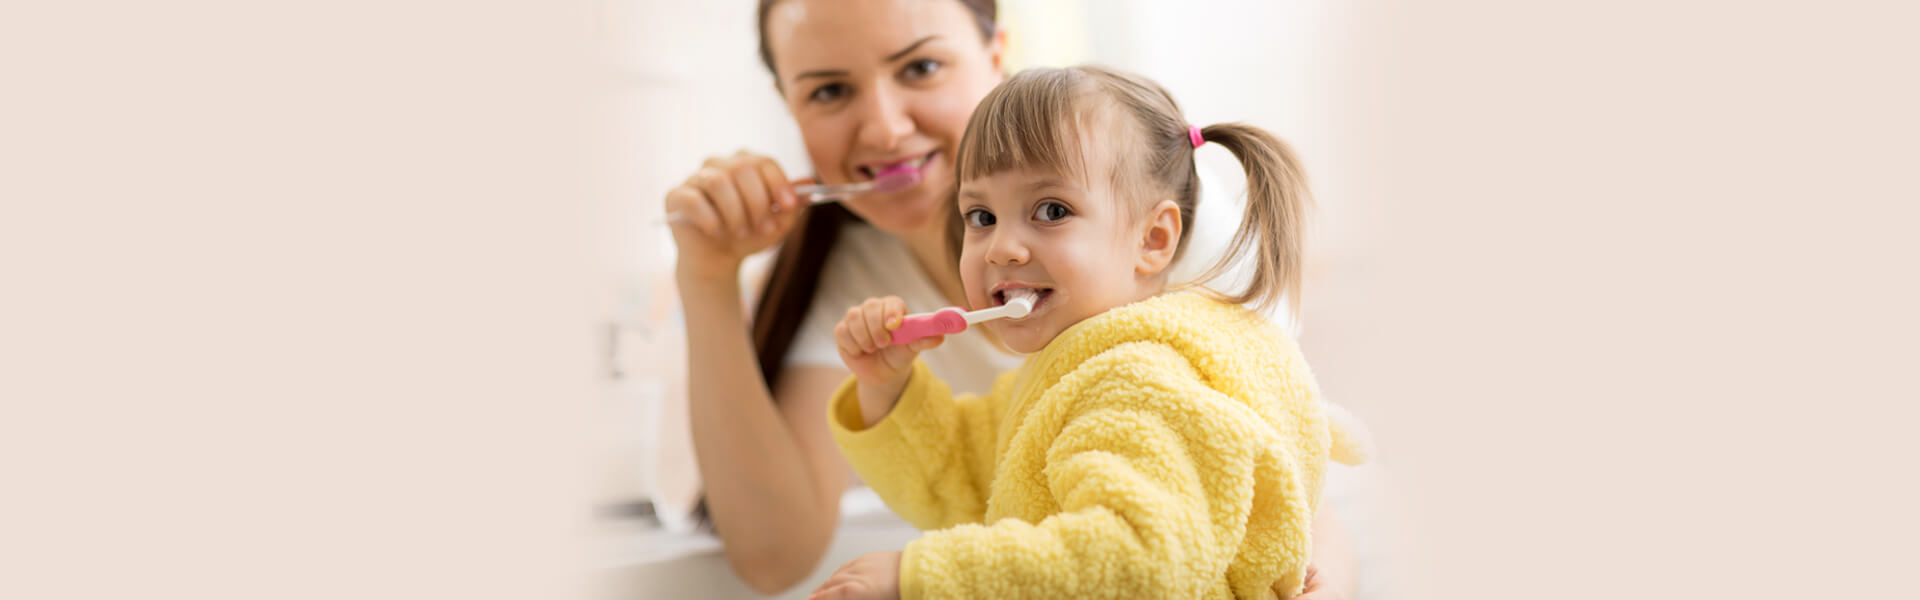 How to Encourage Your Child to Clean Their Teeth and Why?